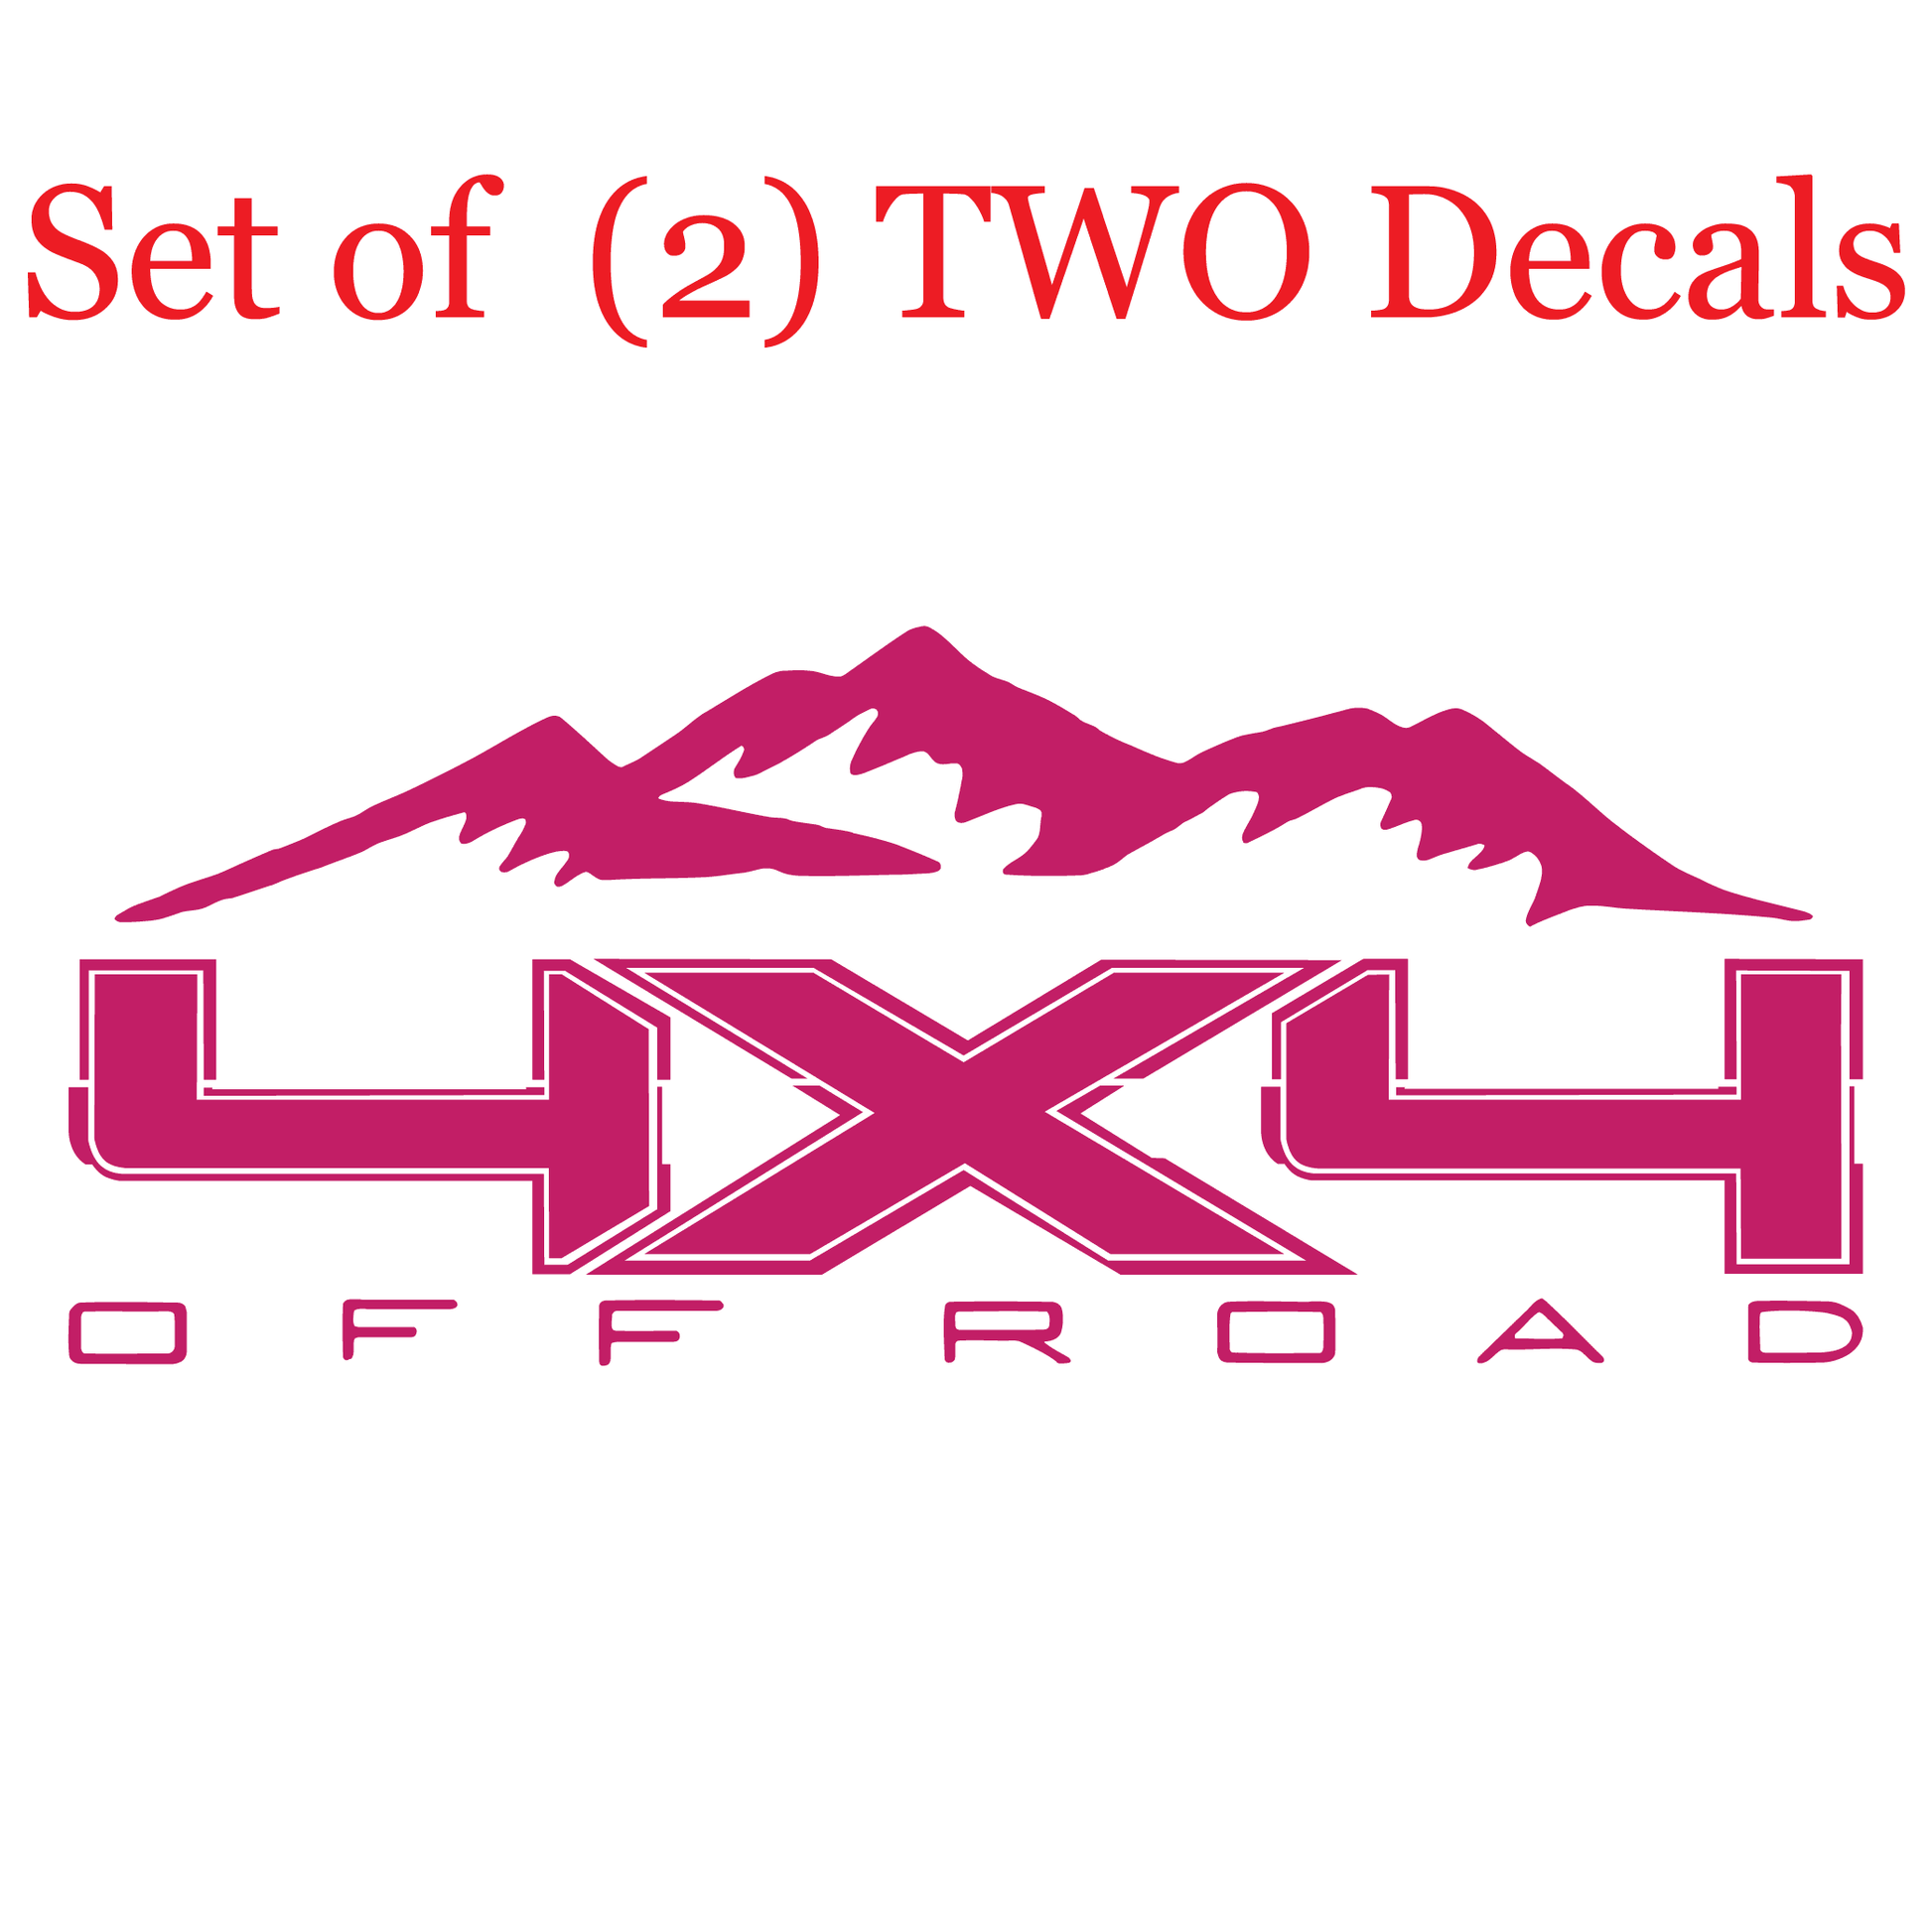 Shop Vinyl Design F-150 F-250 Trucks Replacement Bedside Decals Mountain 4 x 4 Off Road #09 Vehicle decal 001 Hot Pink Gloss Shop Vinyl Design decals stickers